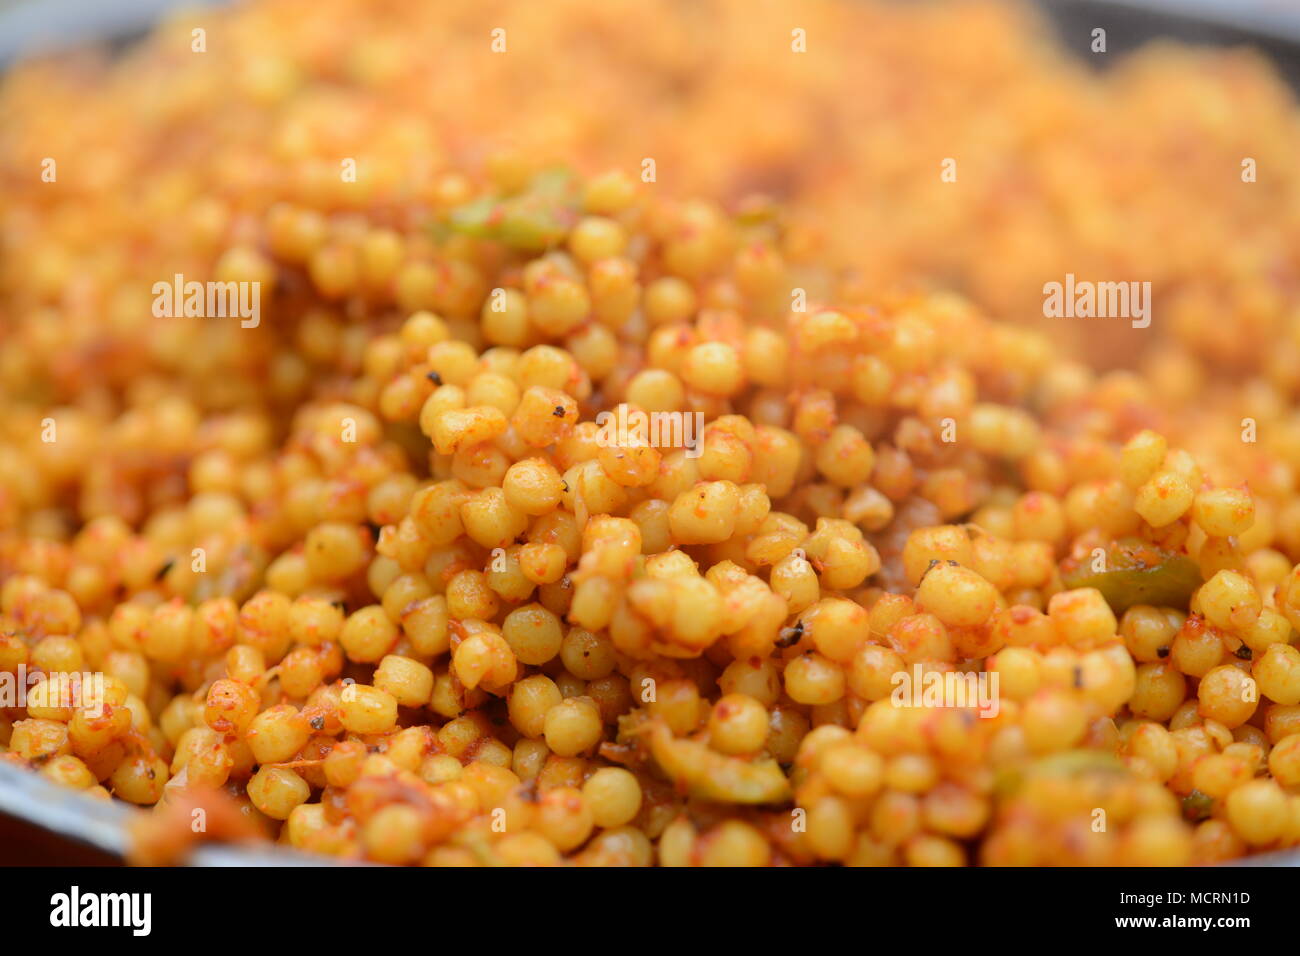 Ptitim is a type of toasted pasta shaped like rice grains or little balls developed in Israel in the 1950s when rice was scarce. Outside Israel, it is Stock Photo